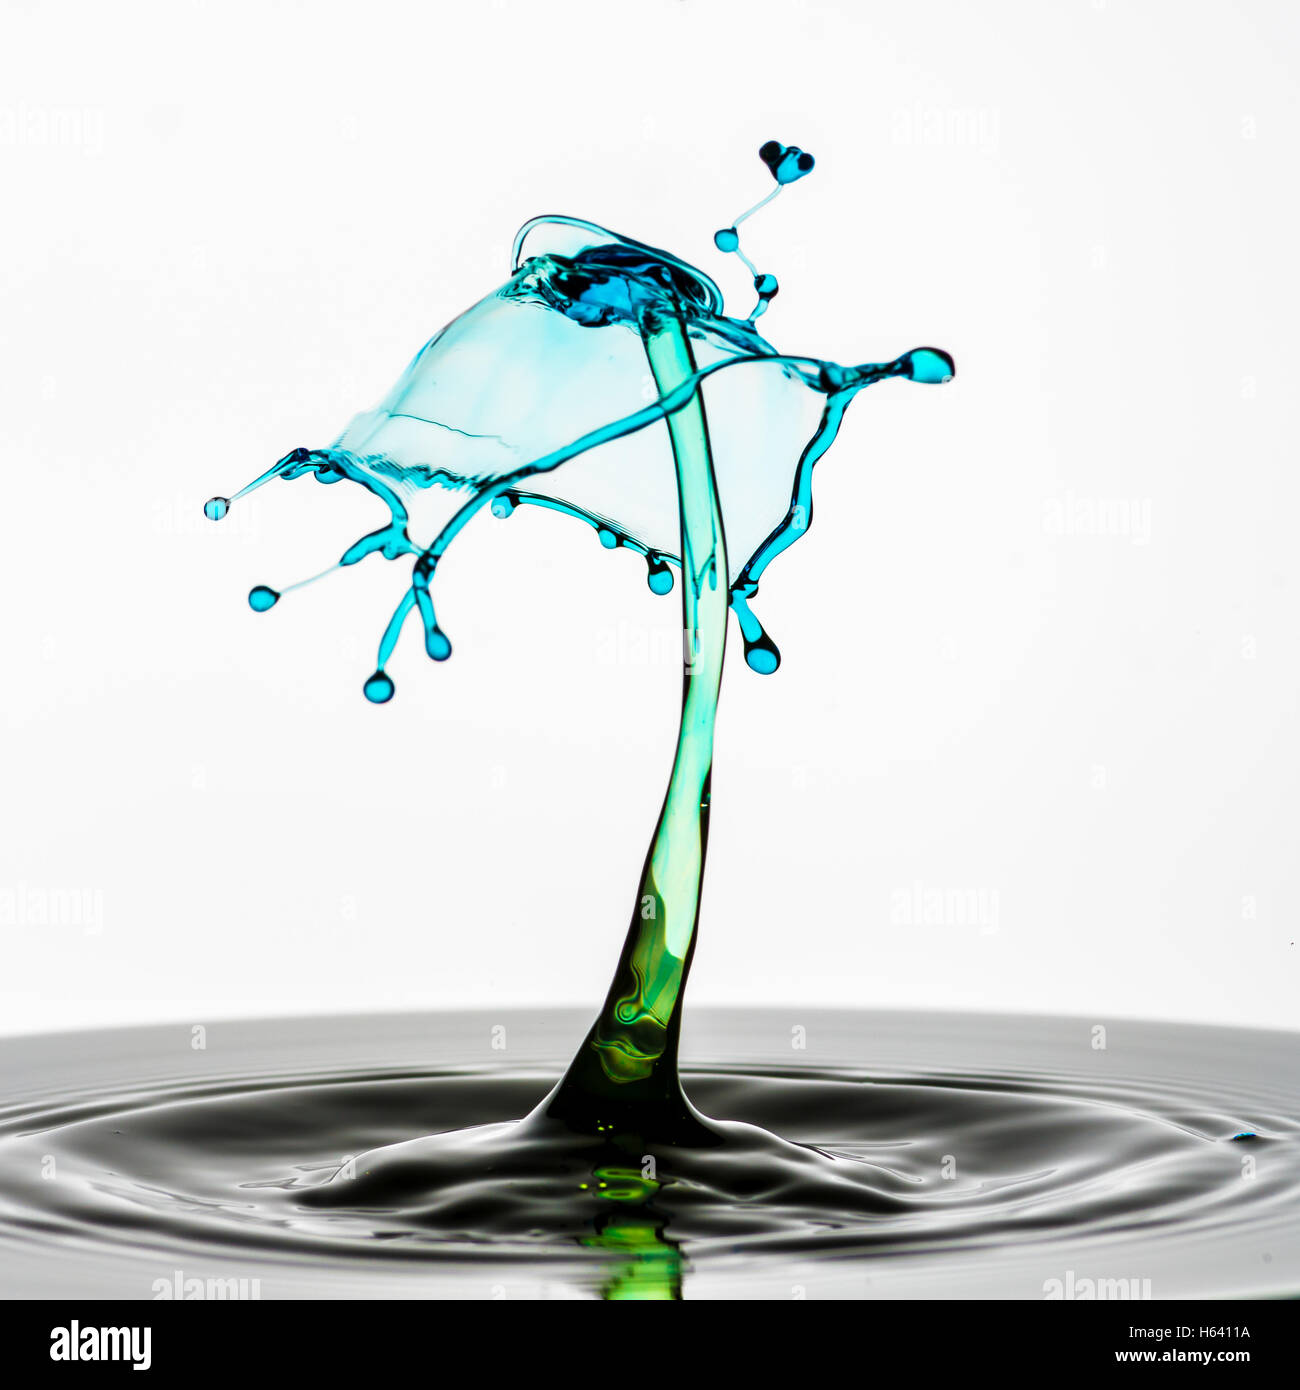 Water droplets colliding in high speed flash image Stock Photo